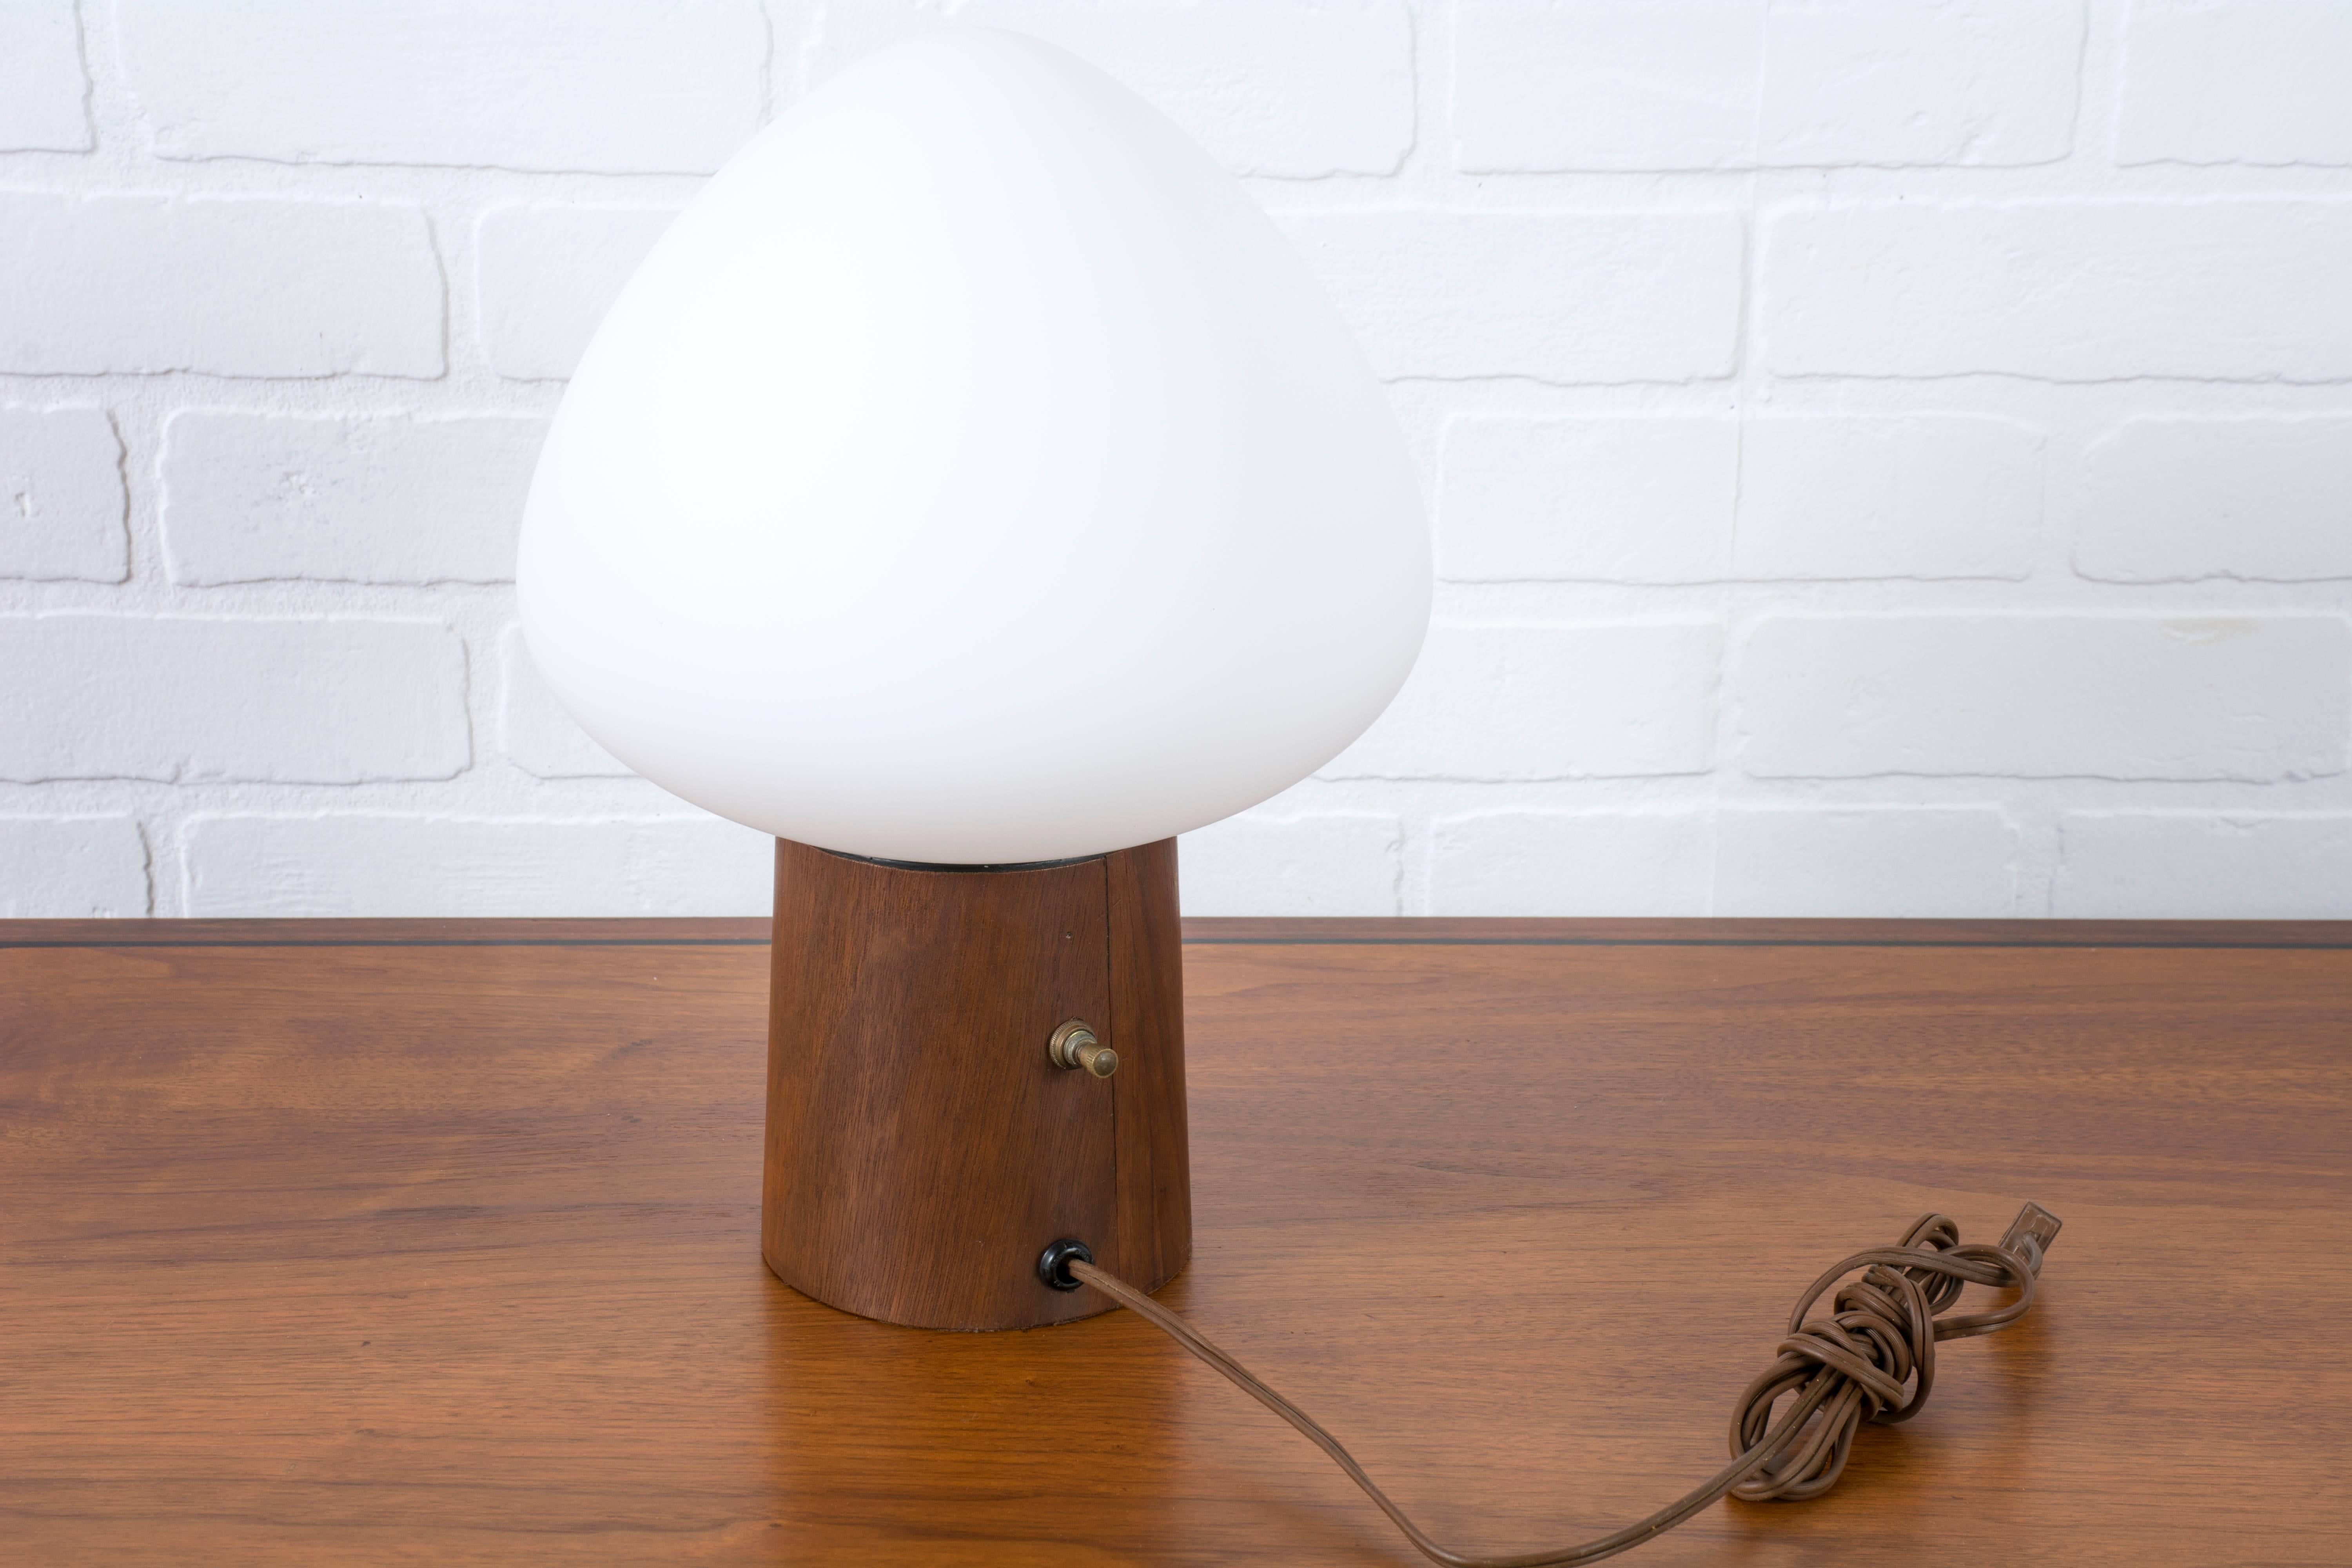 American Mid-Century Modern Table Lamp by Laurel Lamp Co.